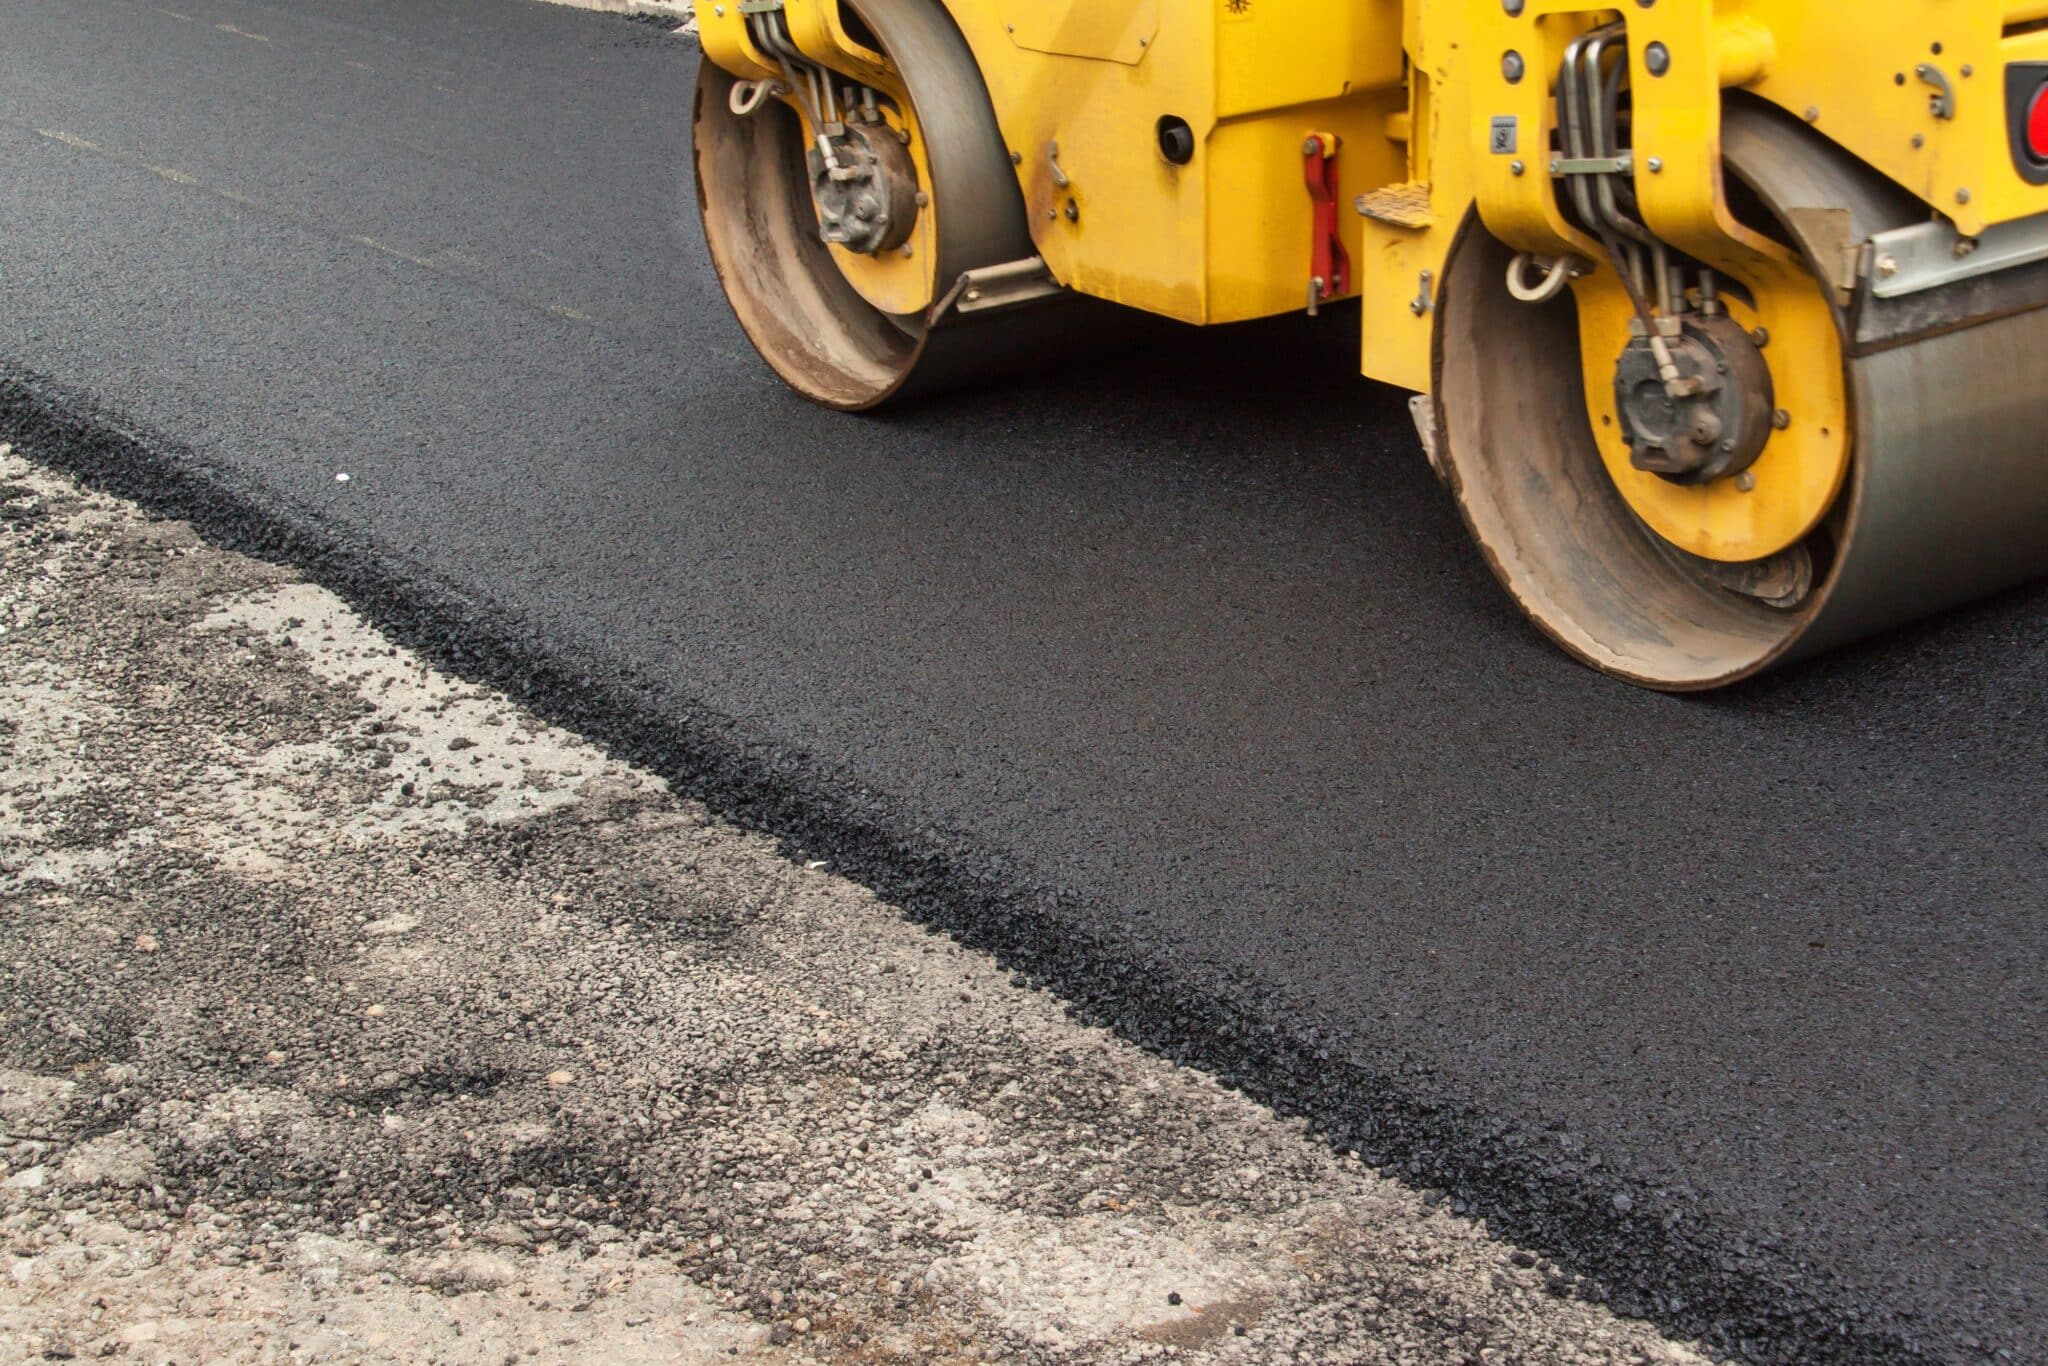 Asphalt Cost Per Square Foot: What's the Average Price?